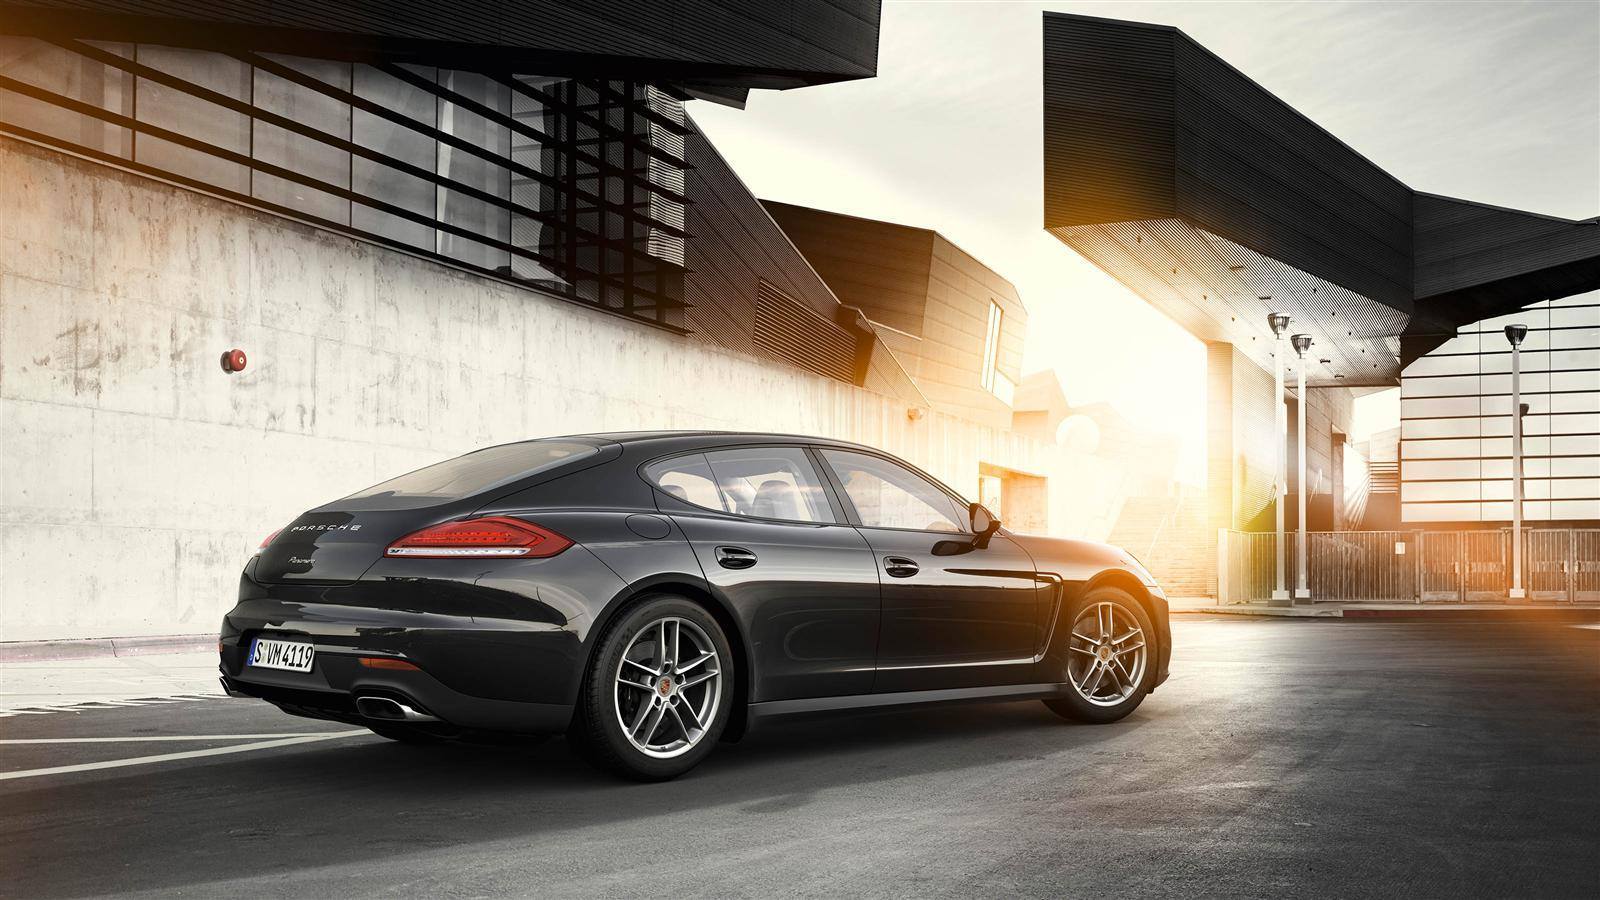 Porsche Lists $148,000 Car for Just $18,000 By Mistake